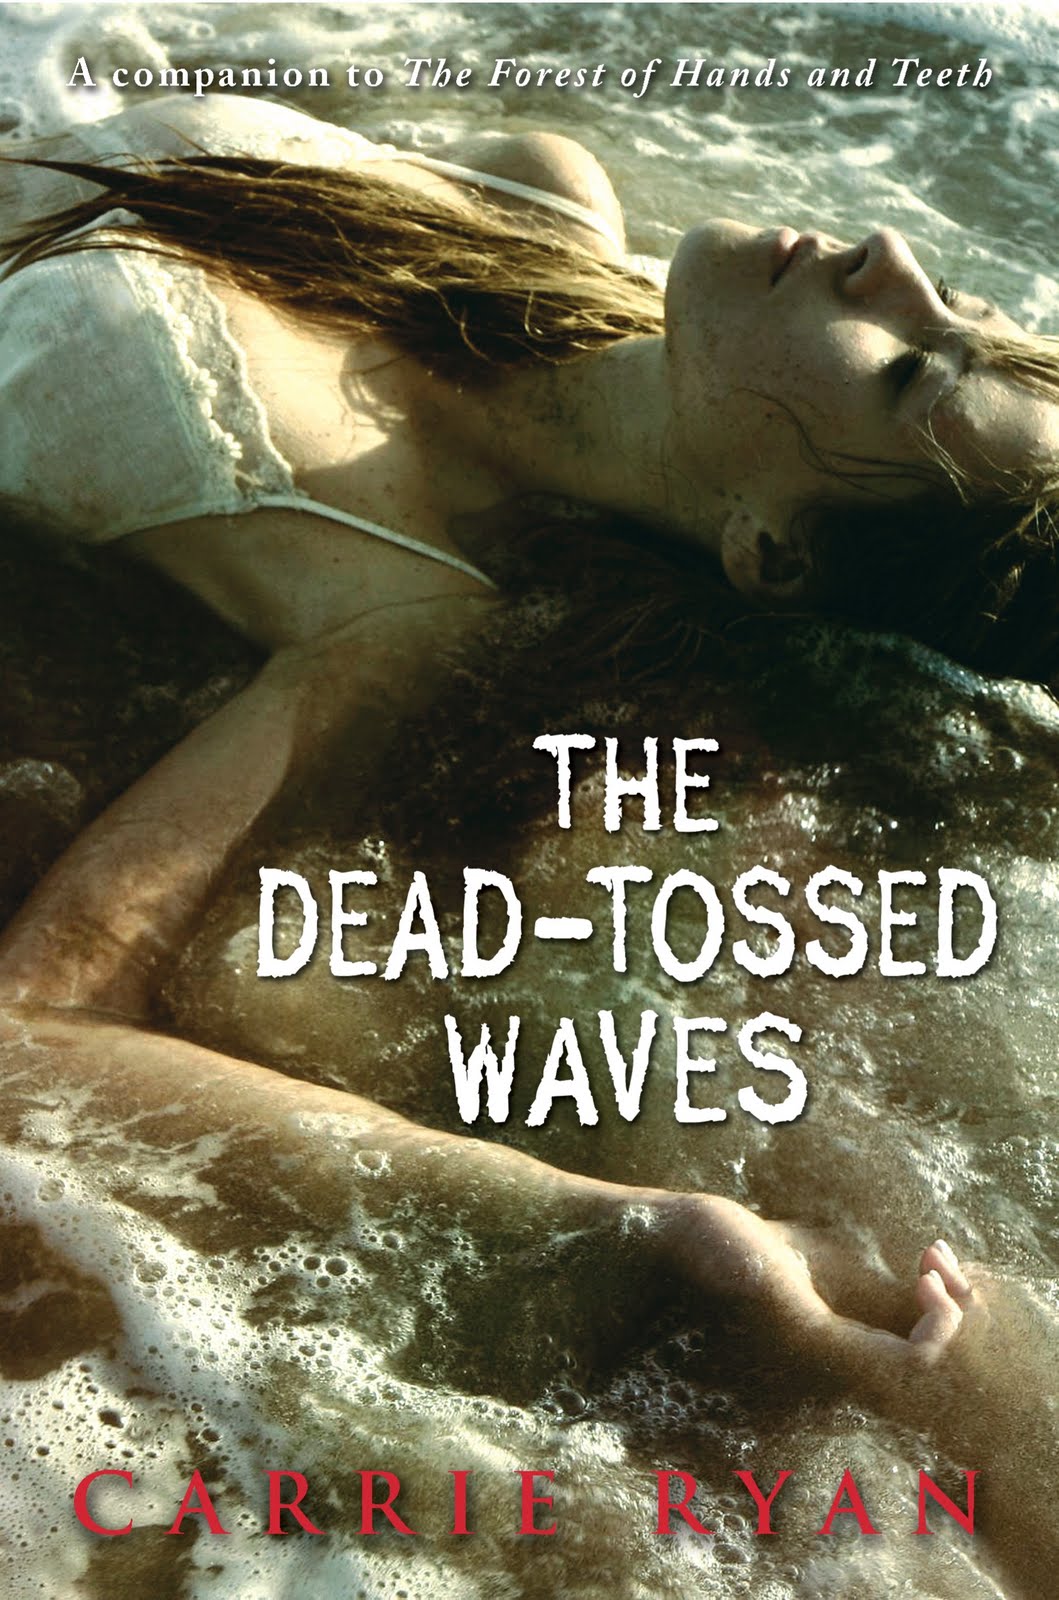 The Dead - Tossed Waves Carrie Ryan